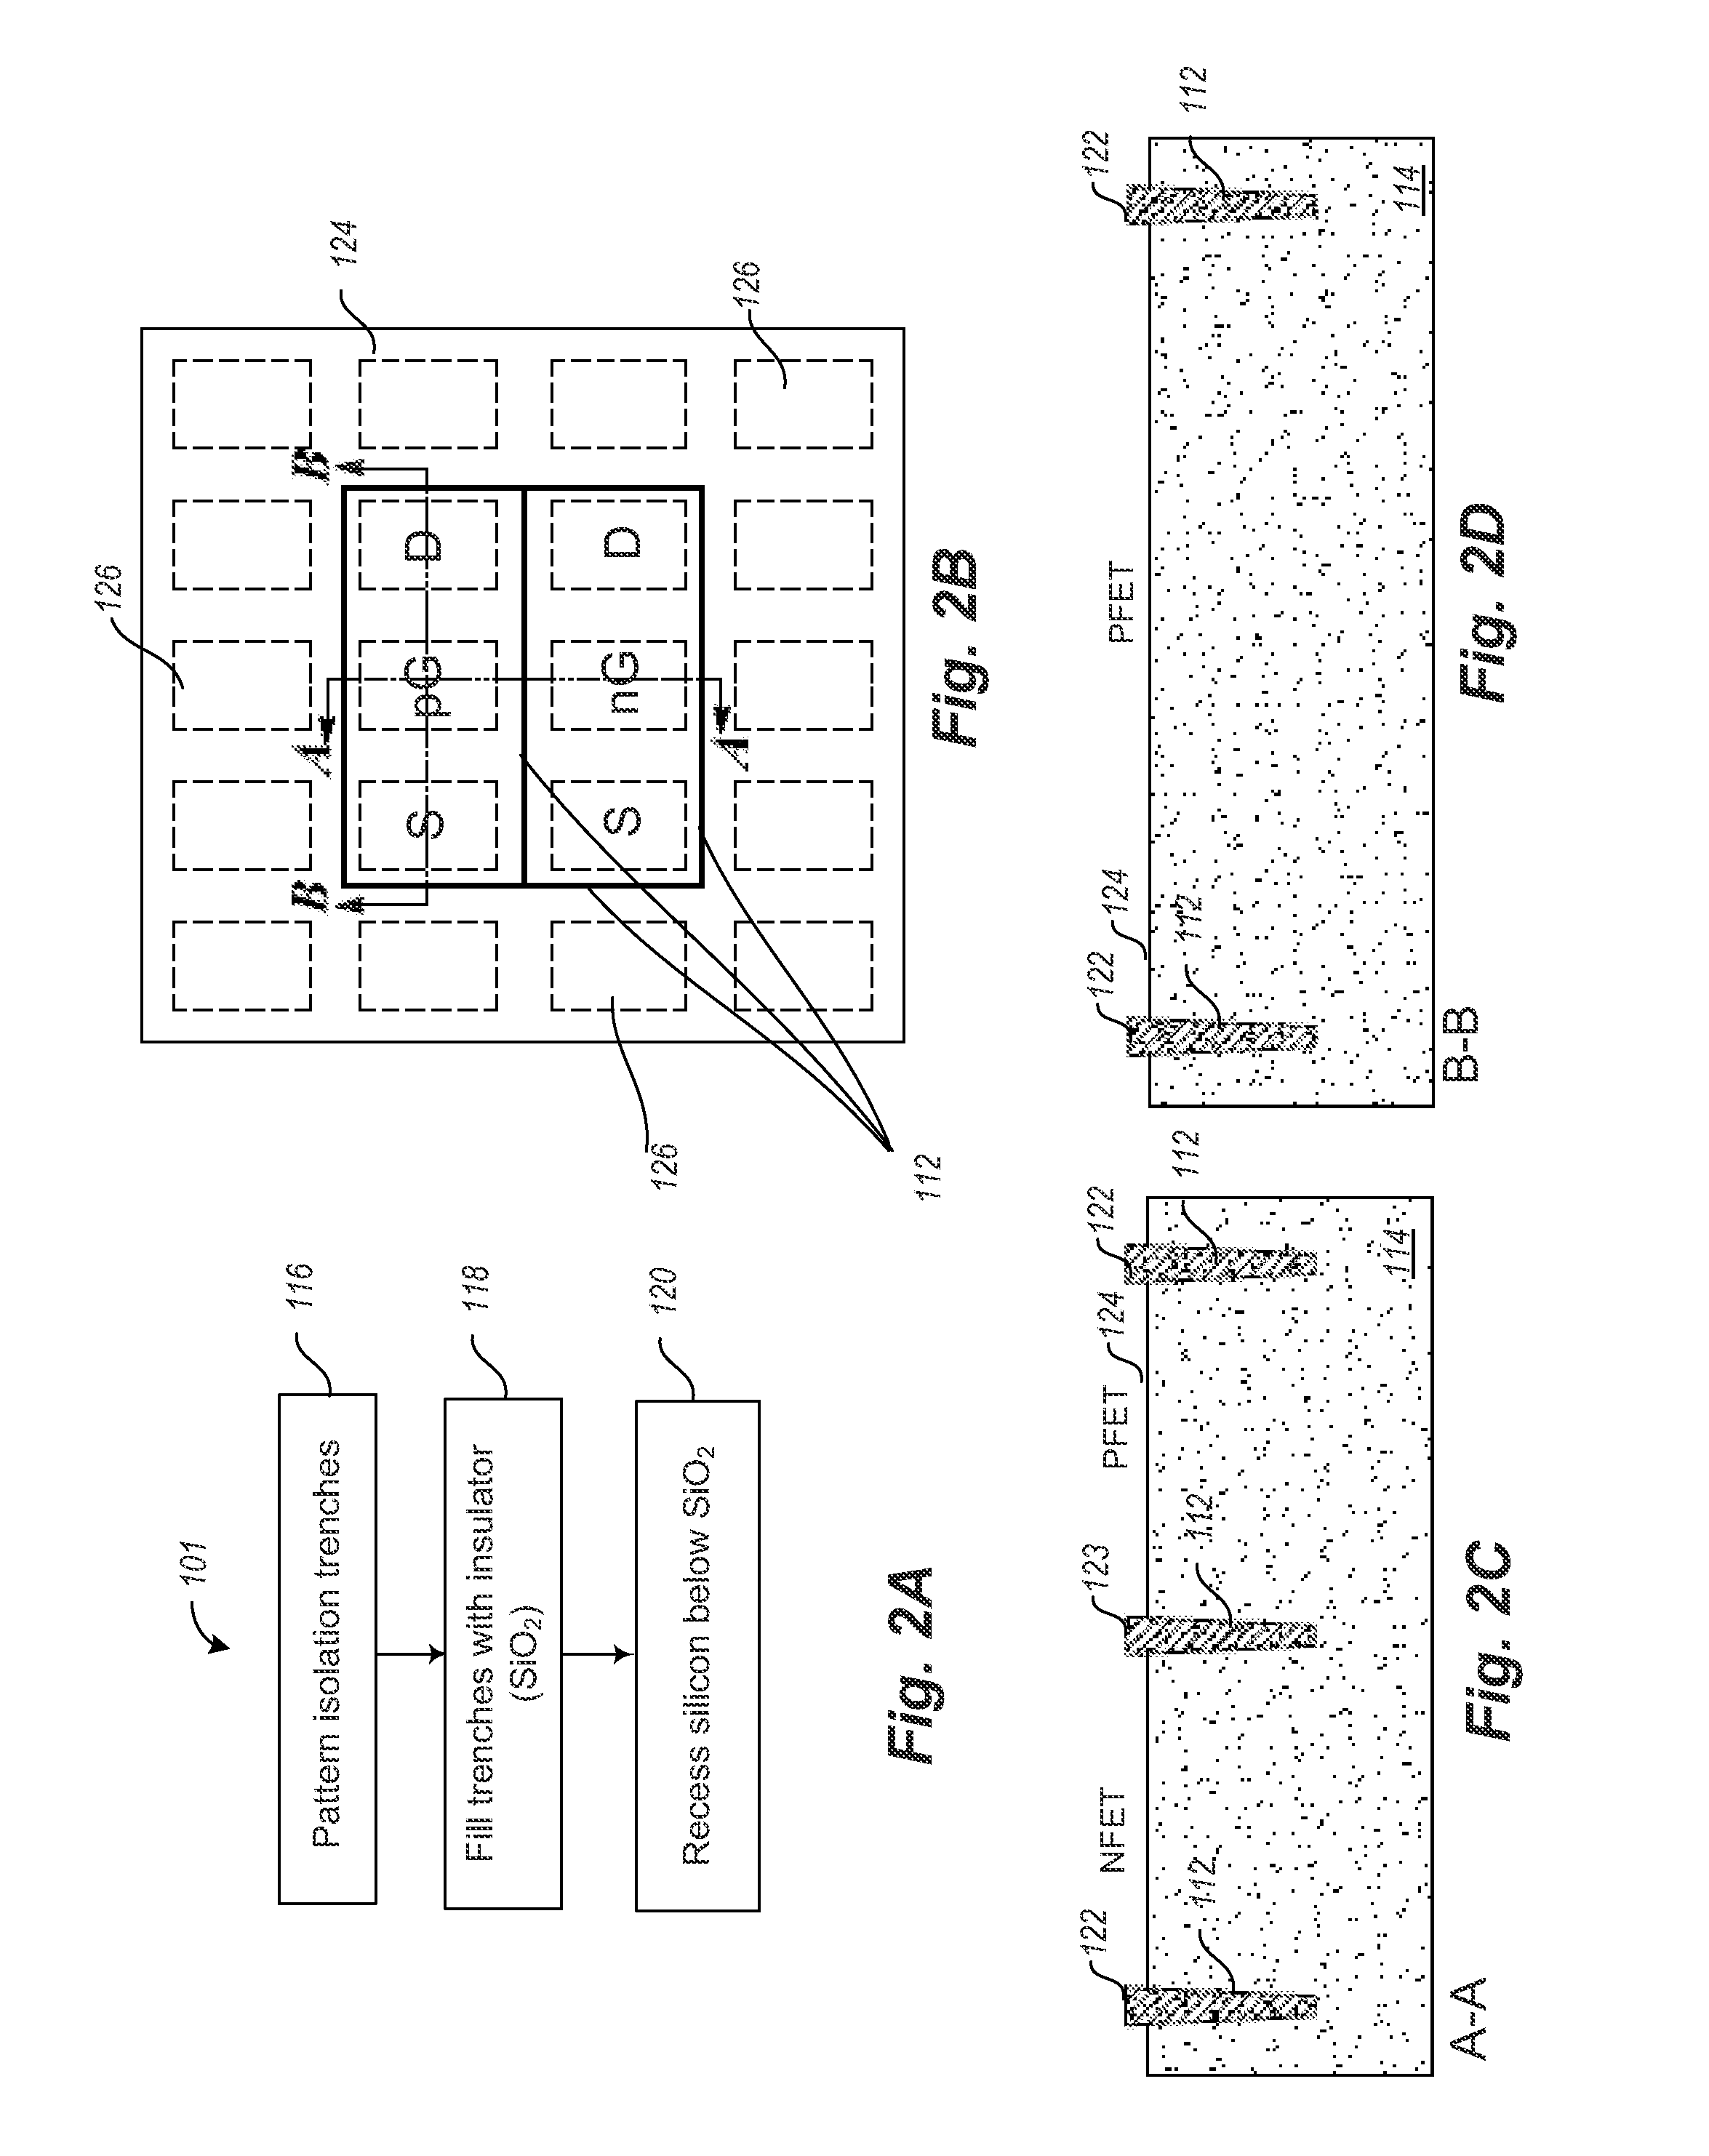 Quantum dot array devices with metal source and drain